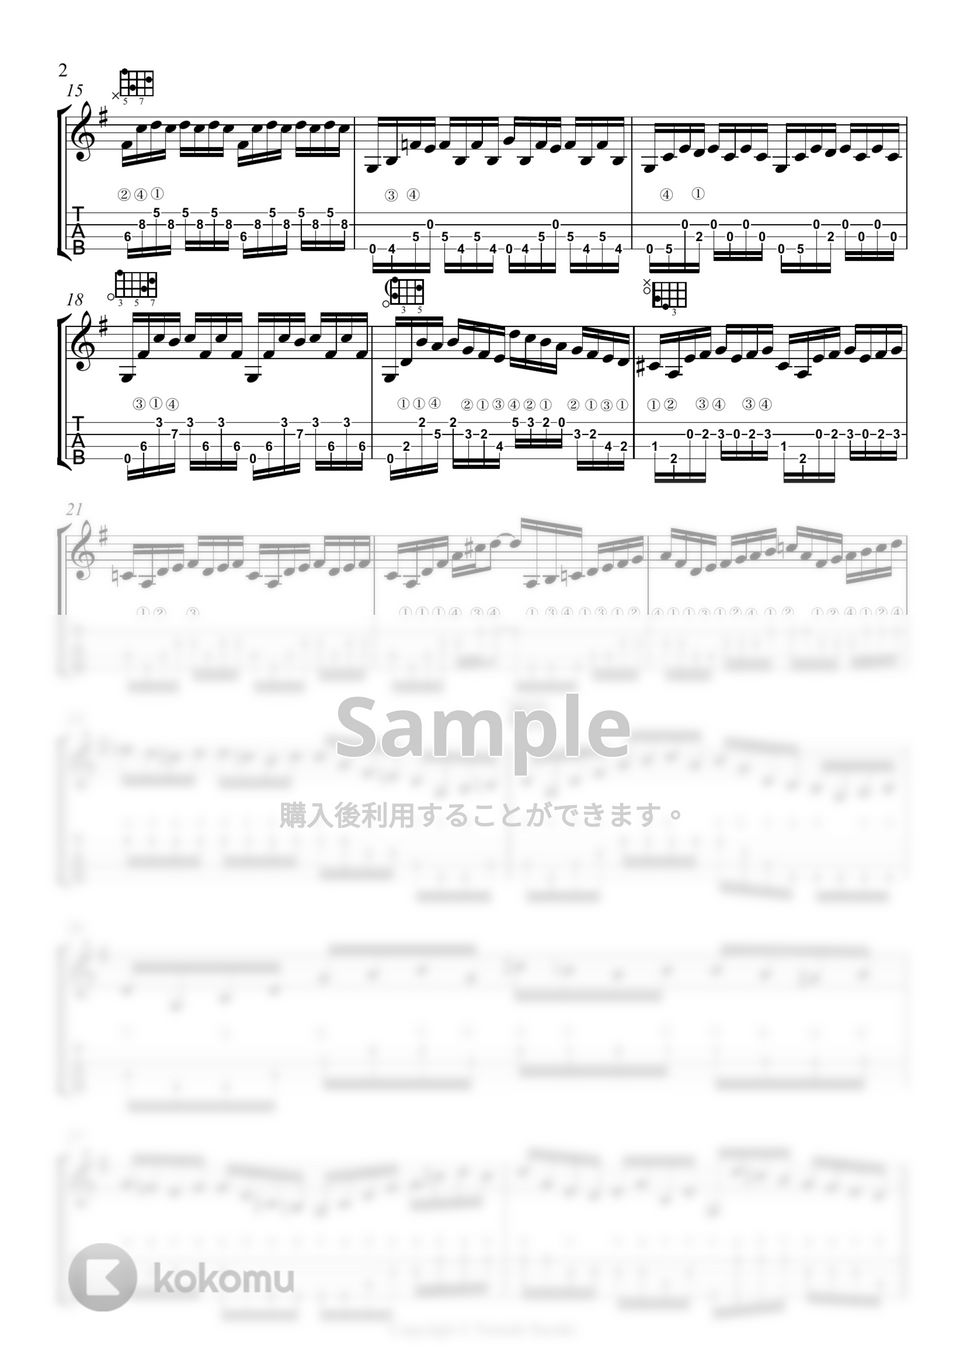 Bach - Prelude from Bach's Cello suite N0.1 by 鈴木智貴